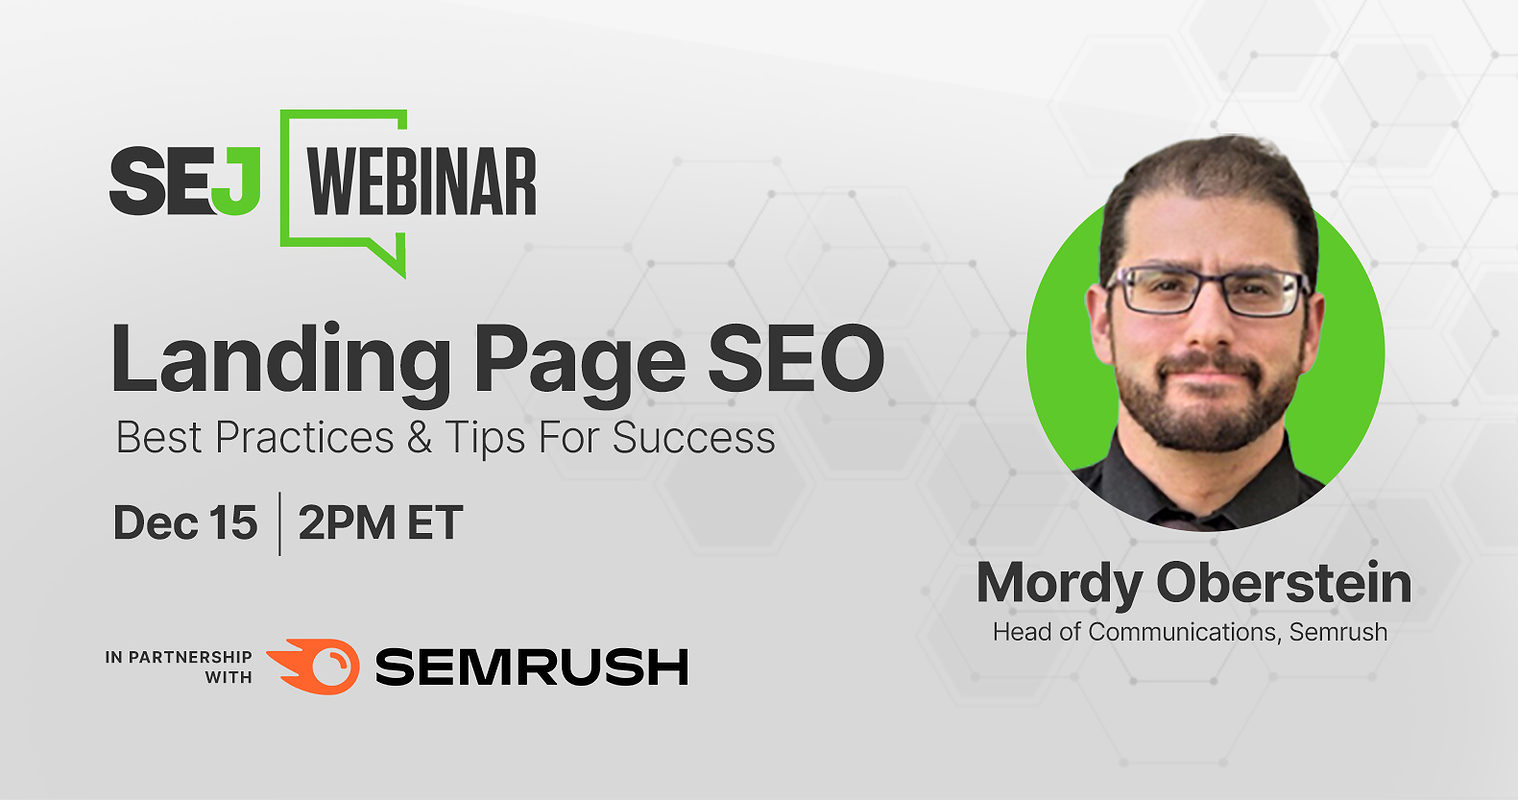 Landing Page SEO Best Practices & Tips For Success [Webinar]